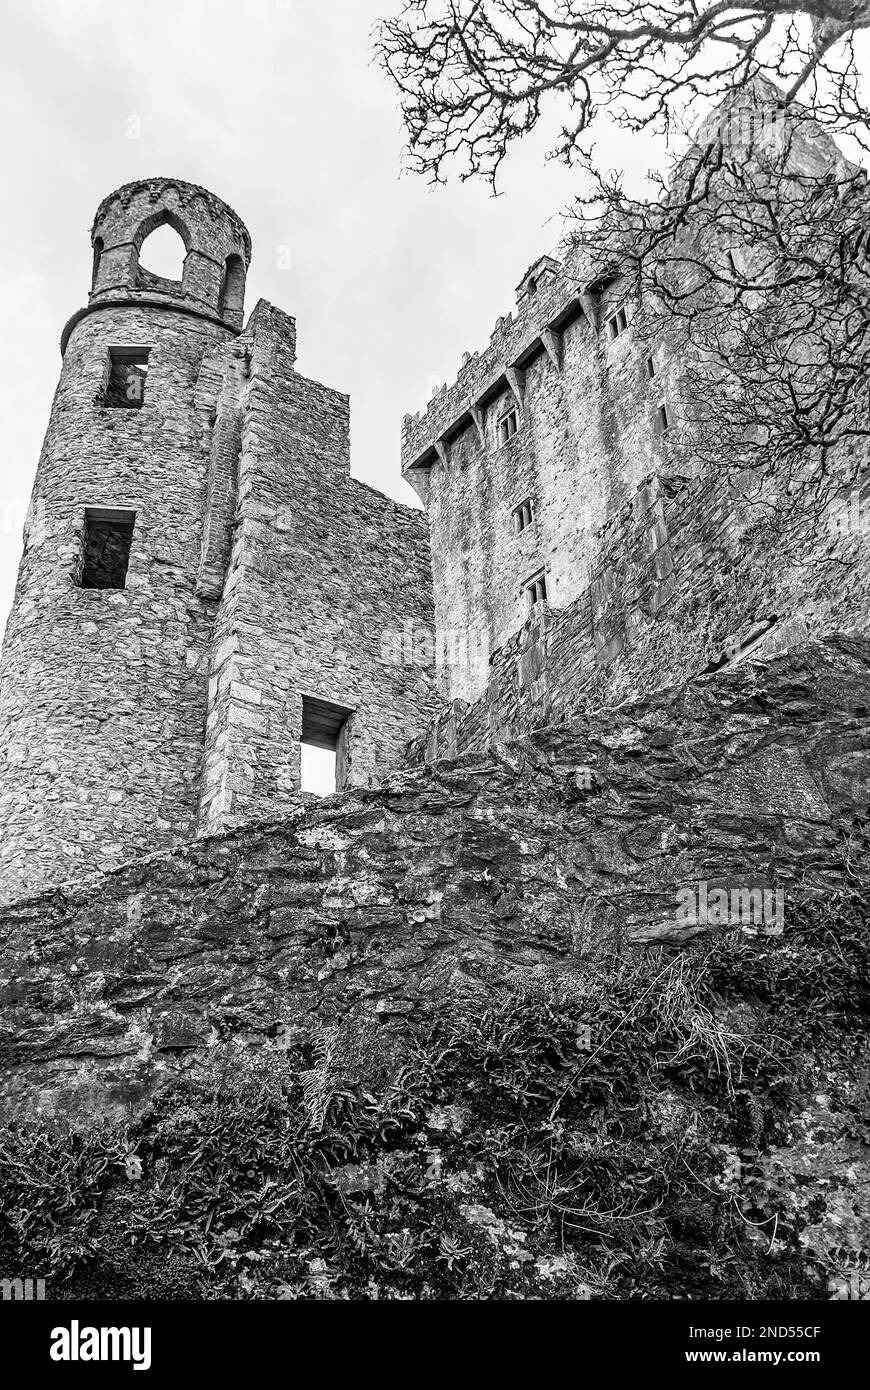 Blarney Castle home of the legendary stone of Blarney, Cork, Ireland in black and white Stock Photo